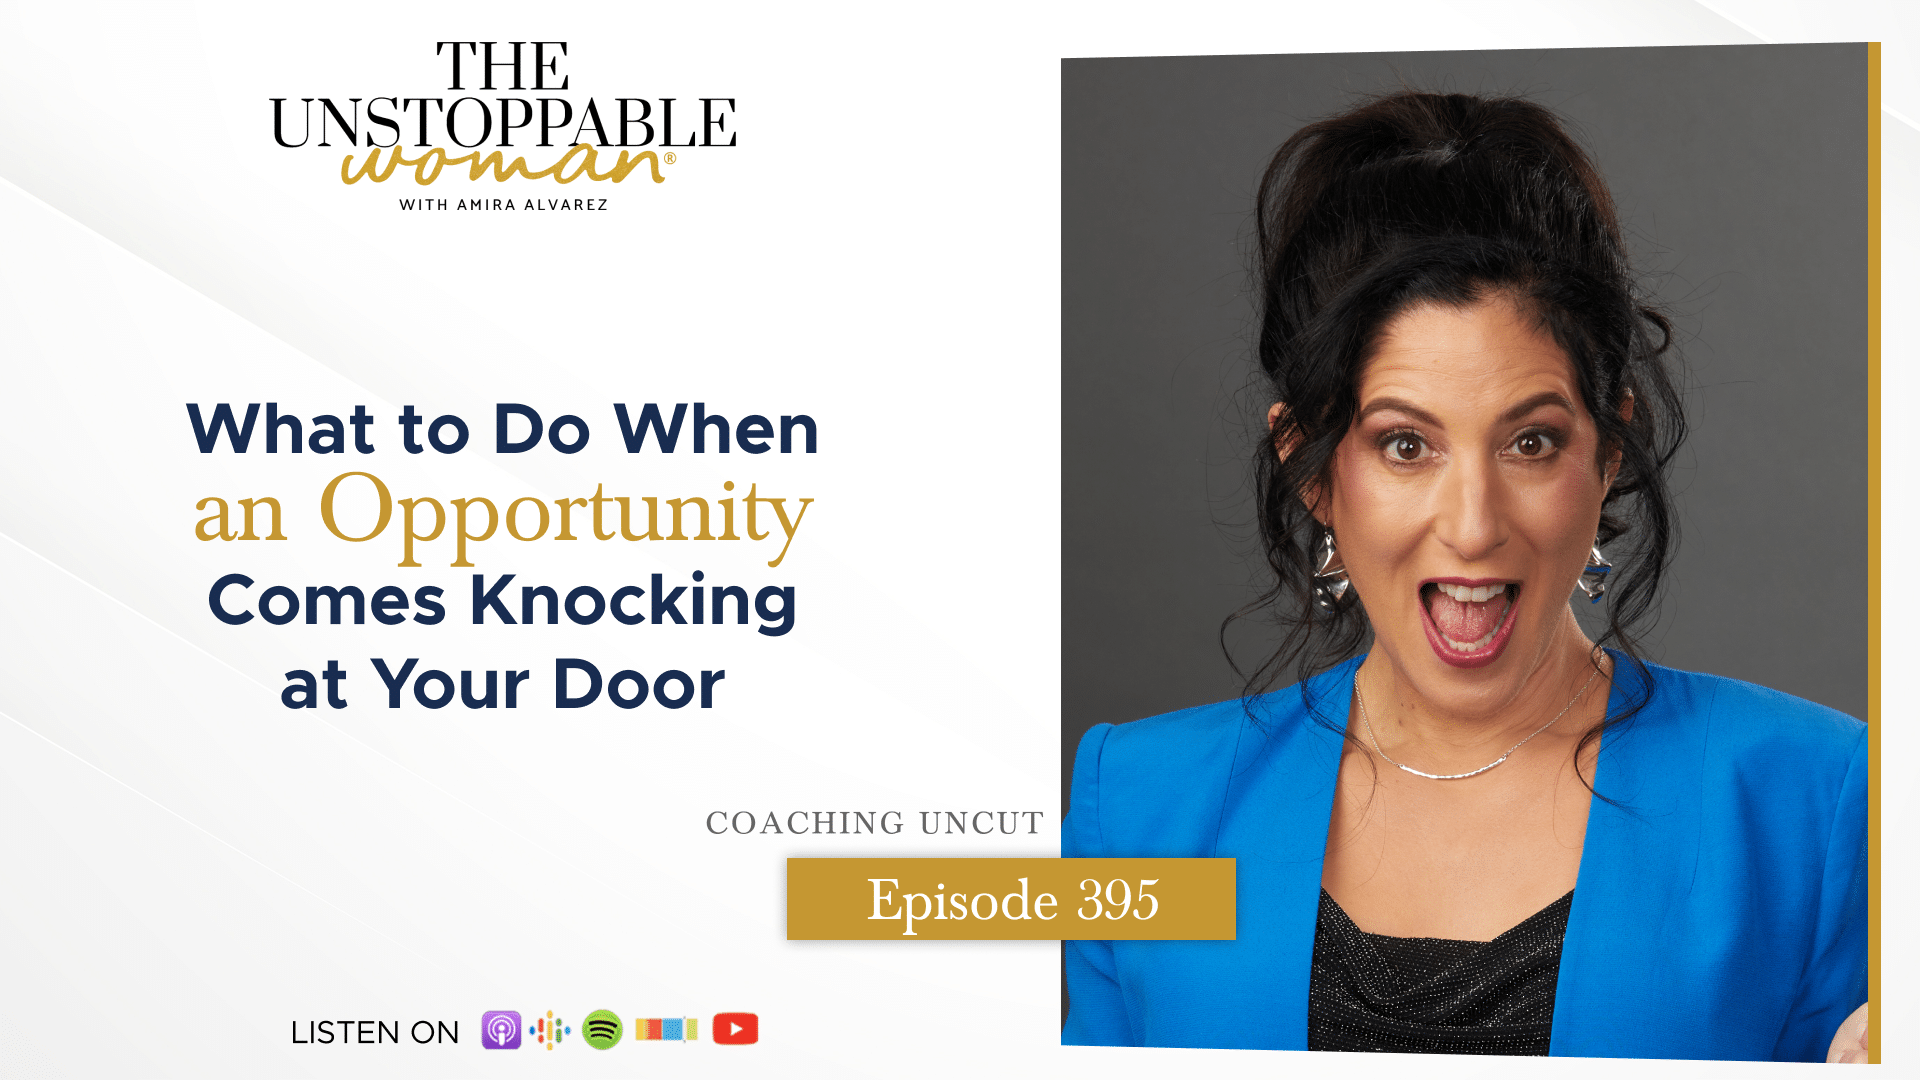 [Image: What to Do When an Opportunity Comes Knocking at Your Door]